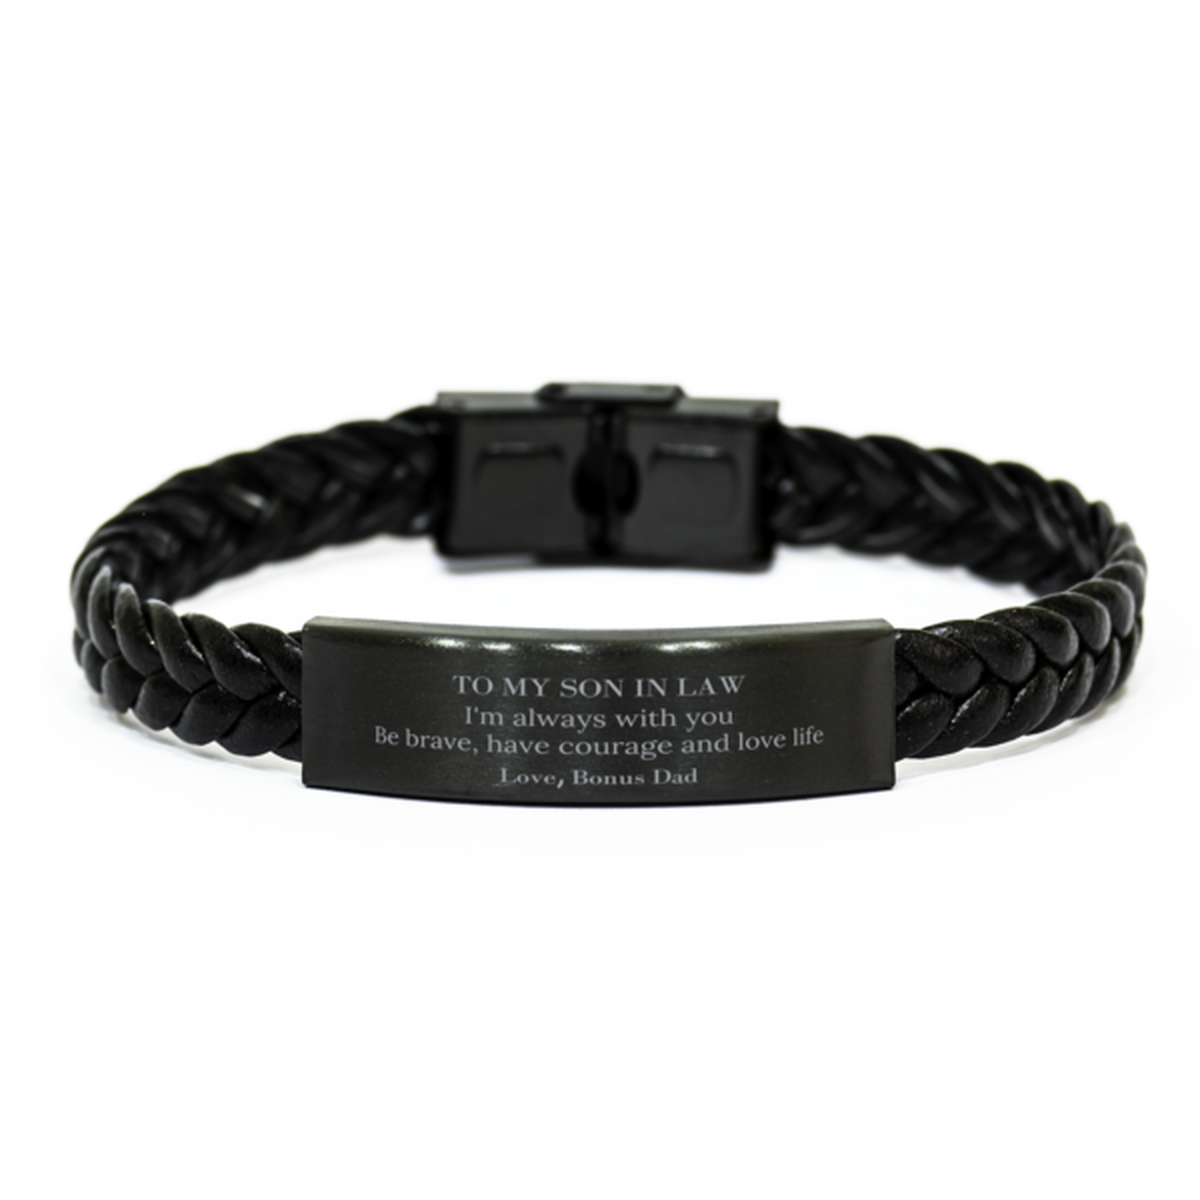 To My Son In Law Gifts from Bonus Dad, Unique Braided Leather Bracelet Inspirational Christmas Birthday Graduation Gifts for Son In Law I'm always with you. Be brave, have courage and love life. Love, Bonus Dad